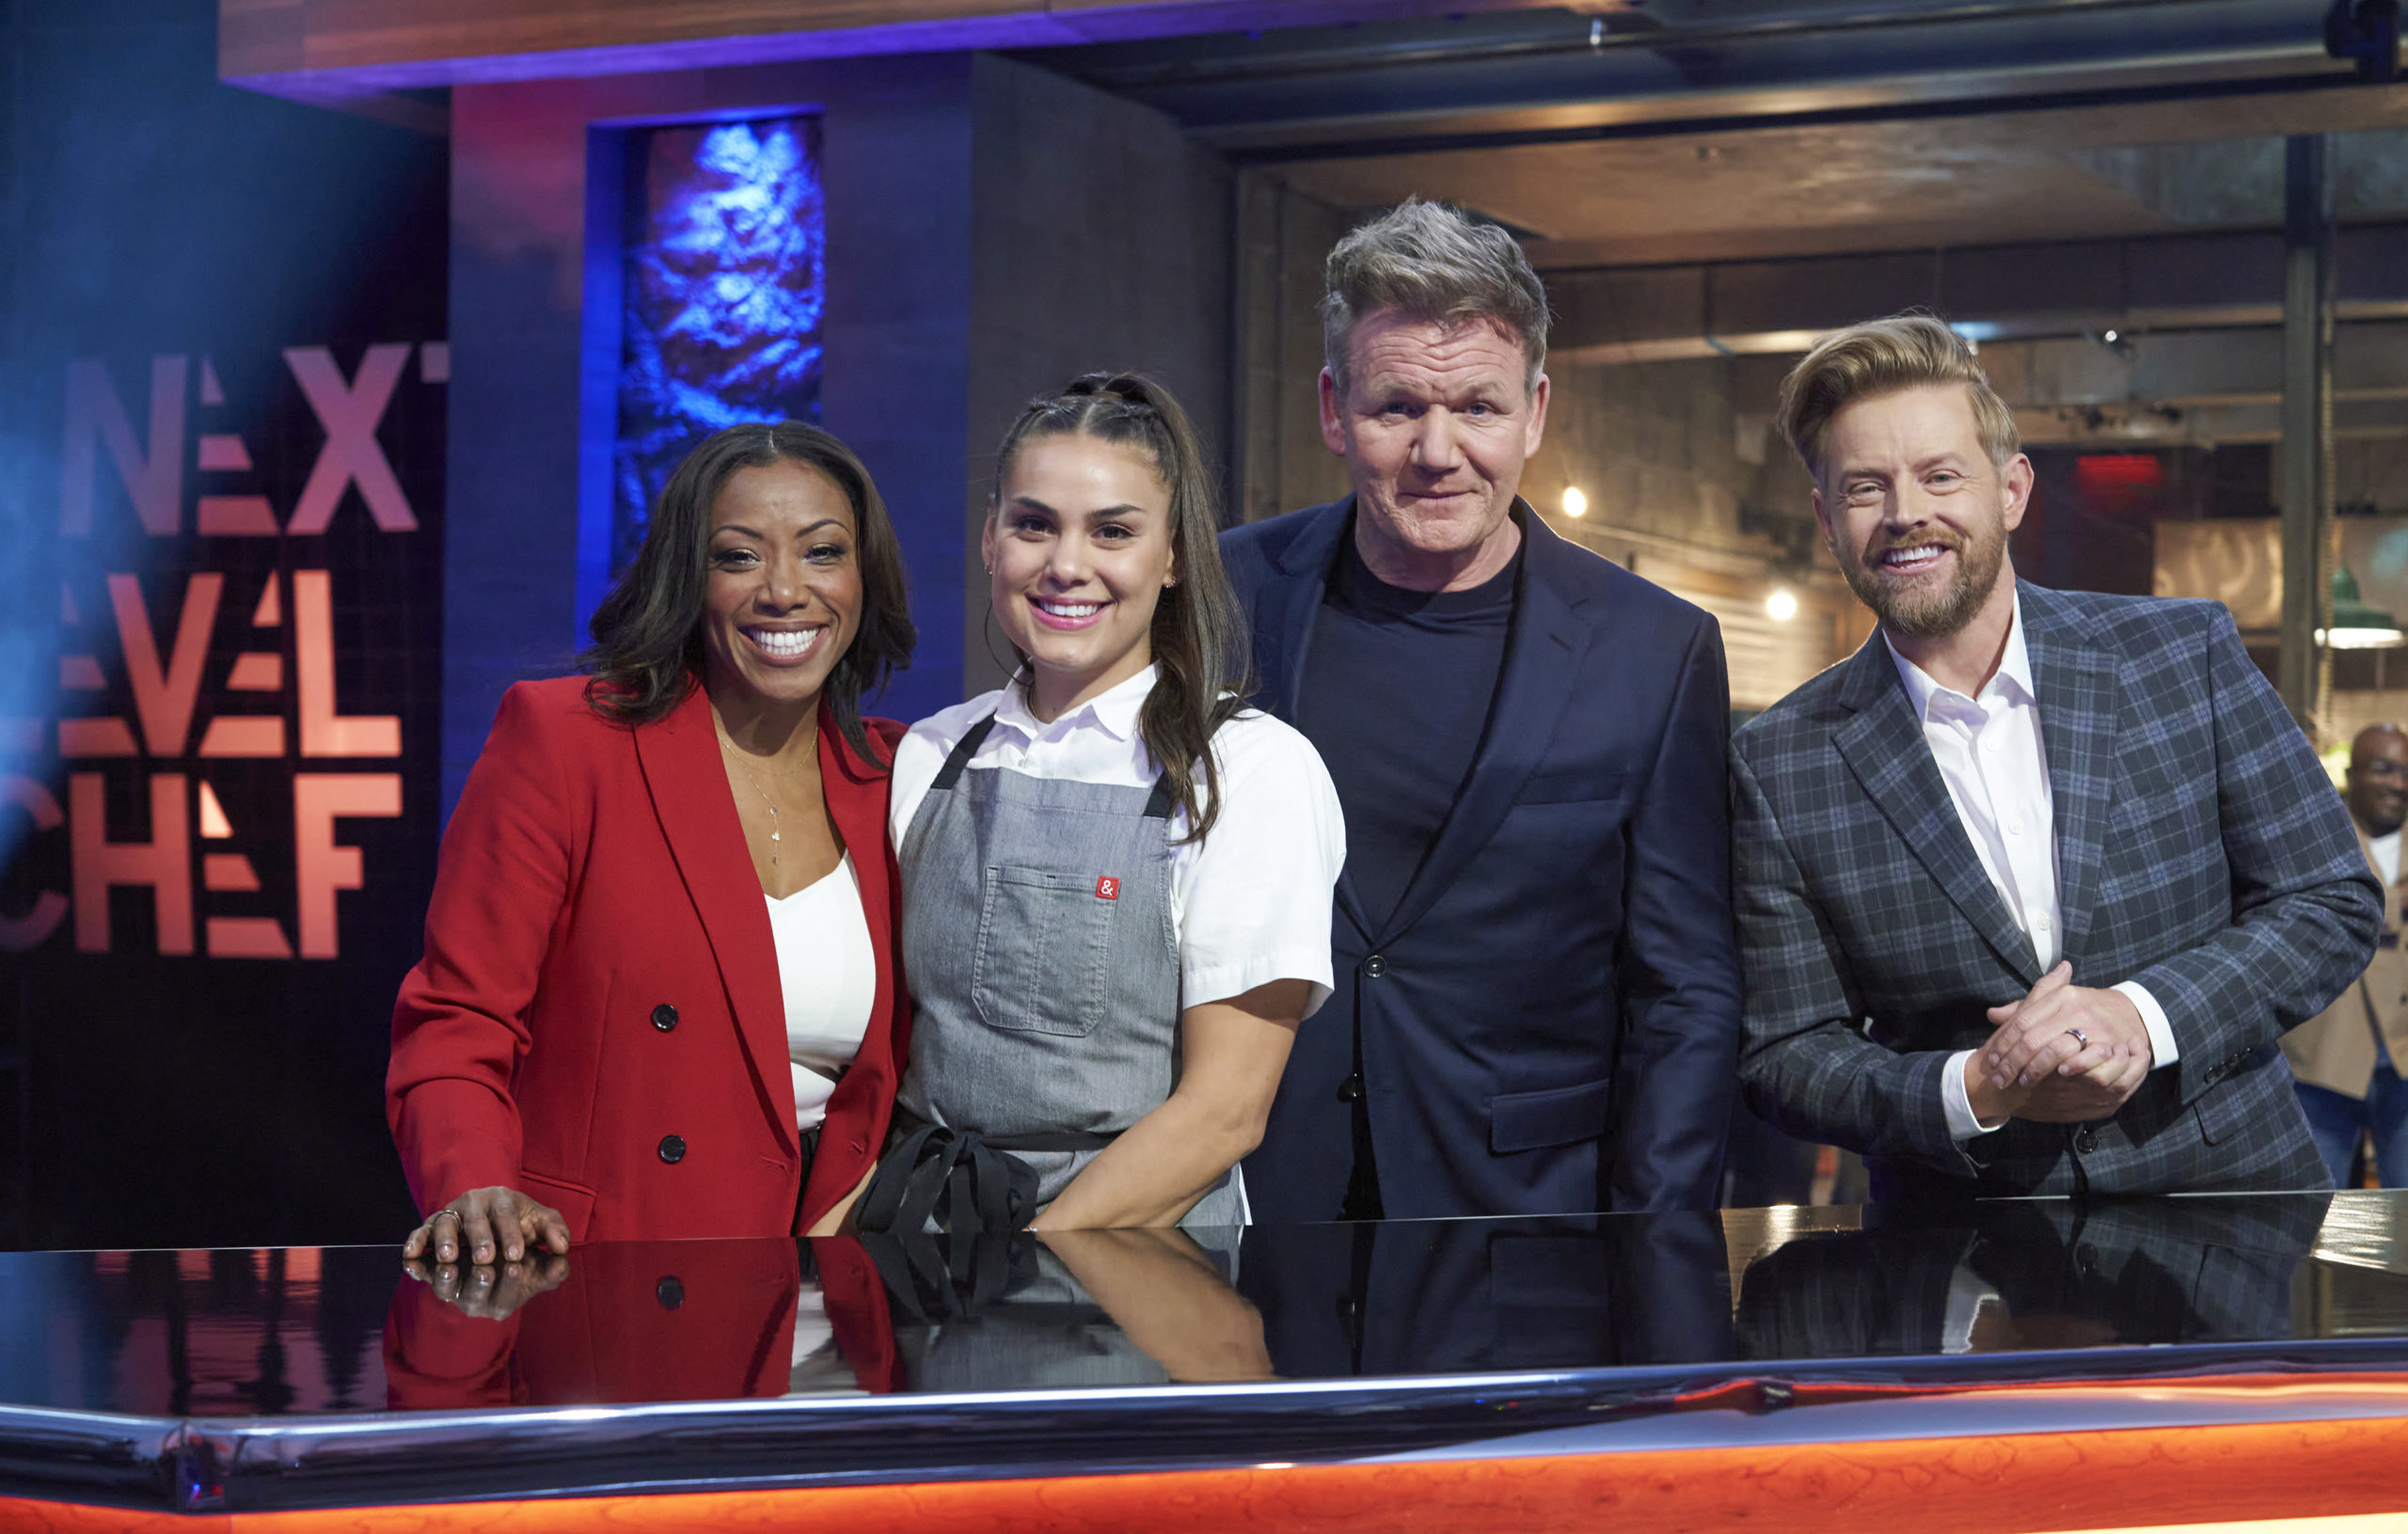 NEXT LEVEL CHEF: L-R: Mentor Nyesha Arrington, winner Stephanie, and mentors Gordon Ramsay and Richard Blaise in the “The Final Level” episode of NEXT LEVEL CHEF airing Wednesday, March 2 (8:00-9:00 ET/PT) on FOX © 2022 FOX Media LLC. CR: FOX.